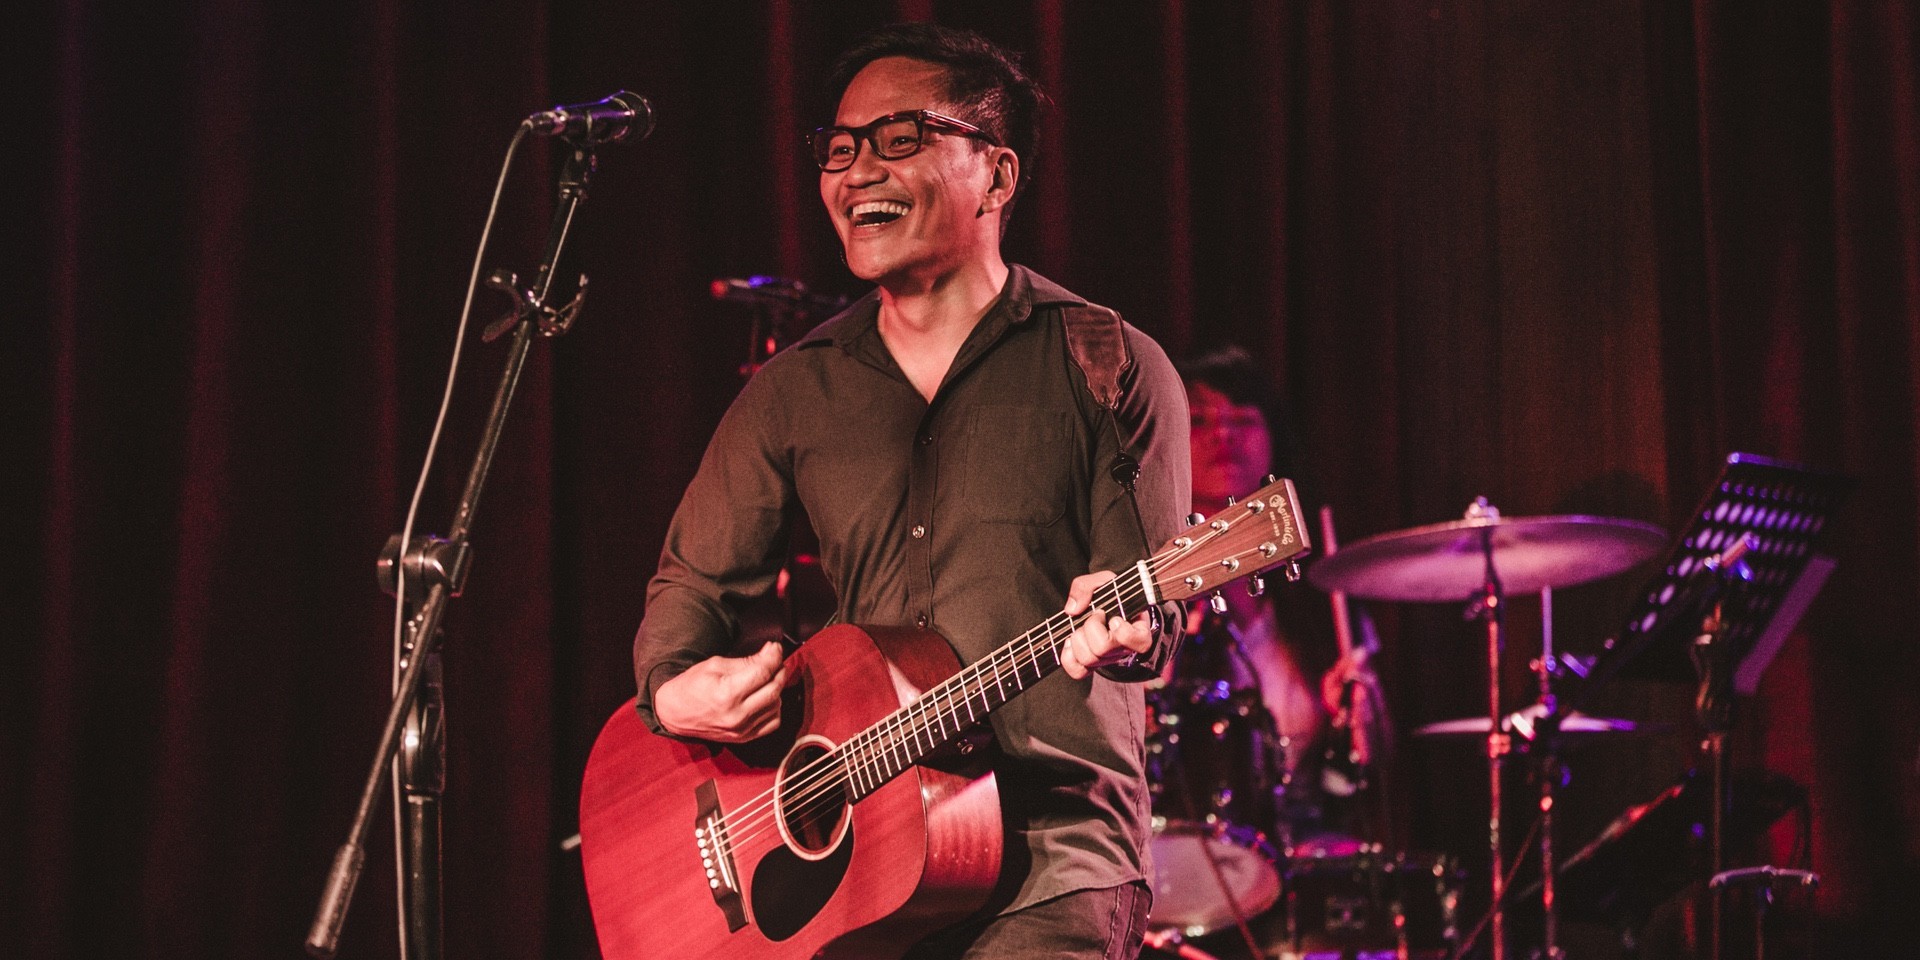 Ebe Dancel to perform in One Music PH's digital concert series